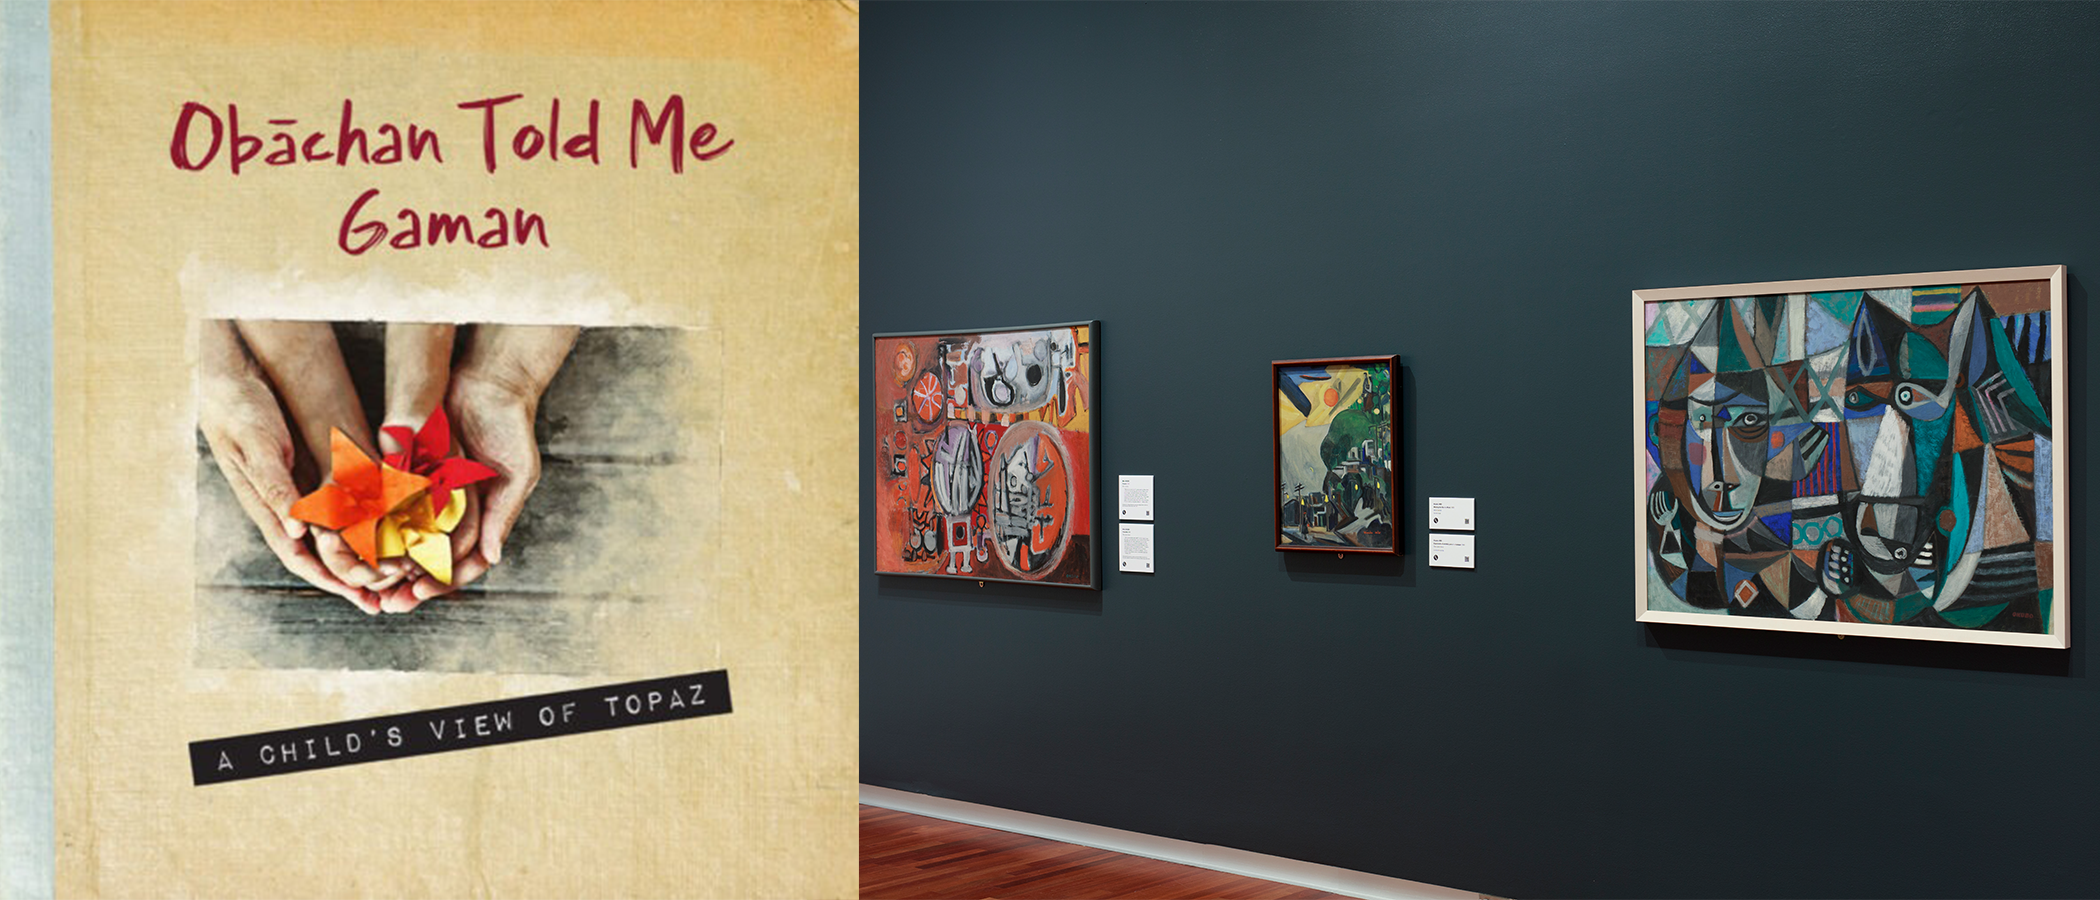 The cover of "Obāchan Told Me Gaman: A Child’s View of Topaz" side by side with a gallery photo of "Pictures of Belonging"